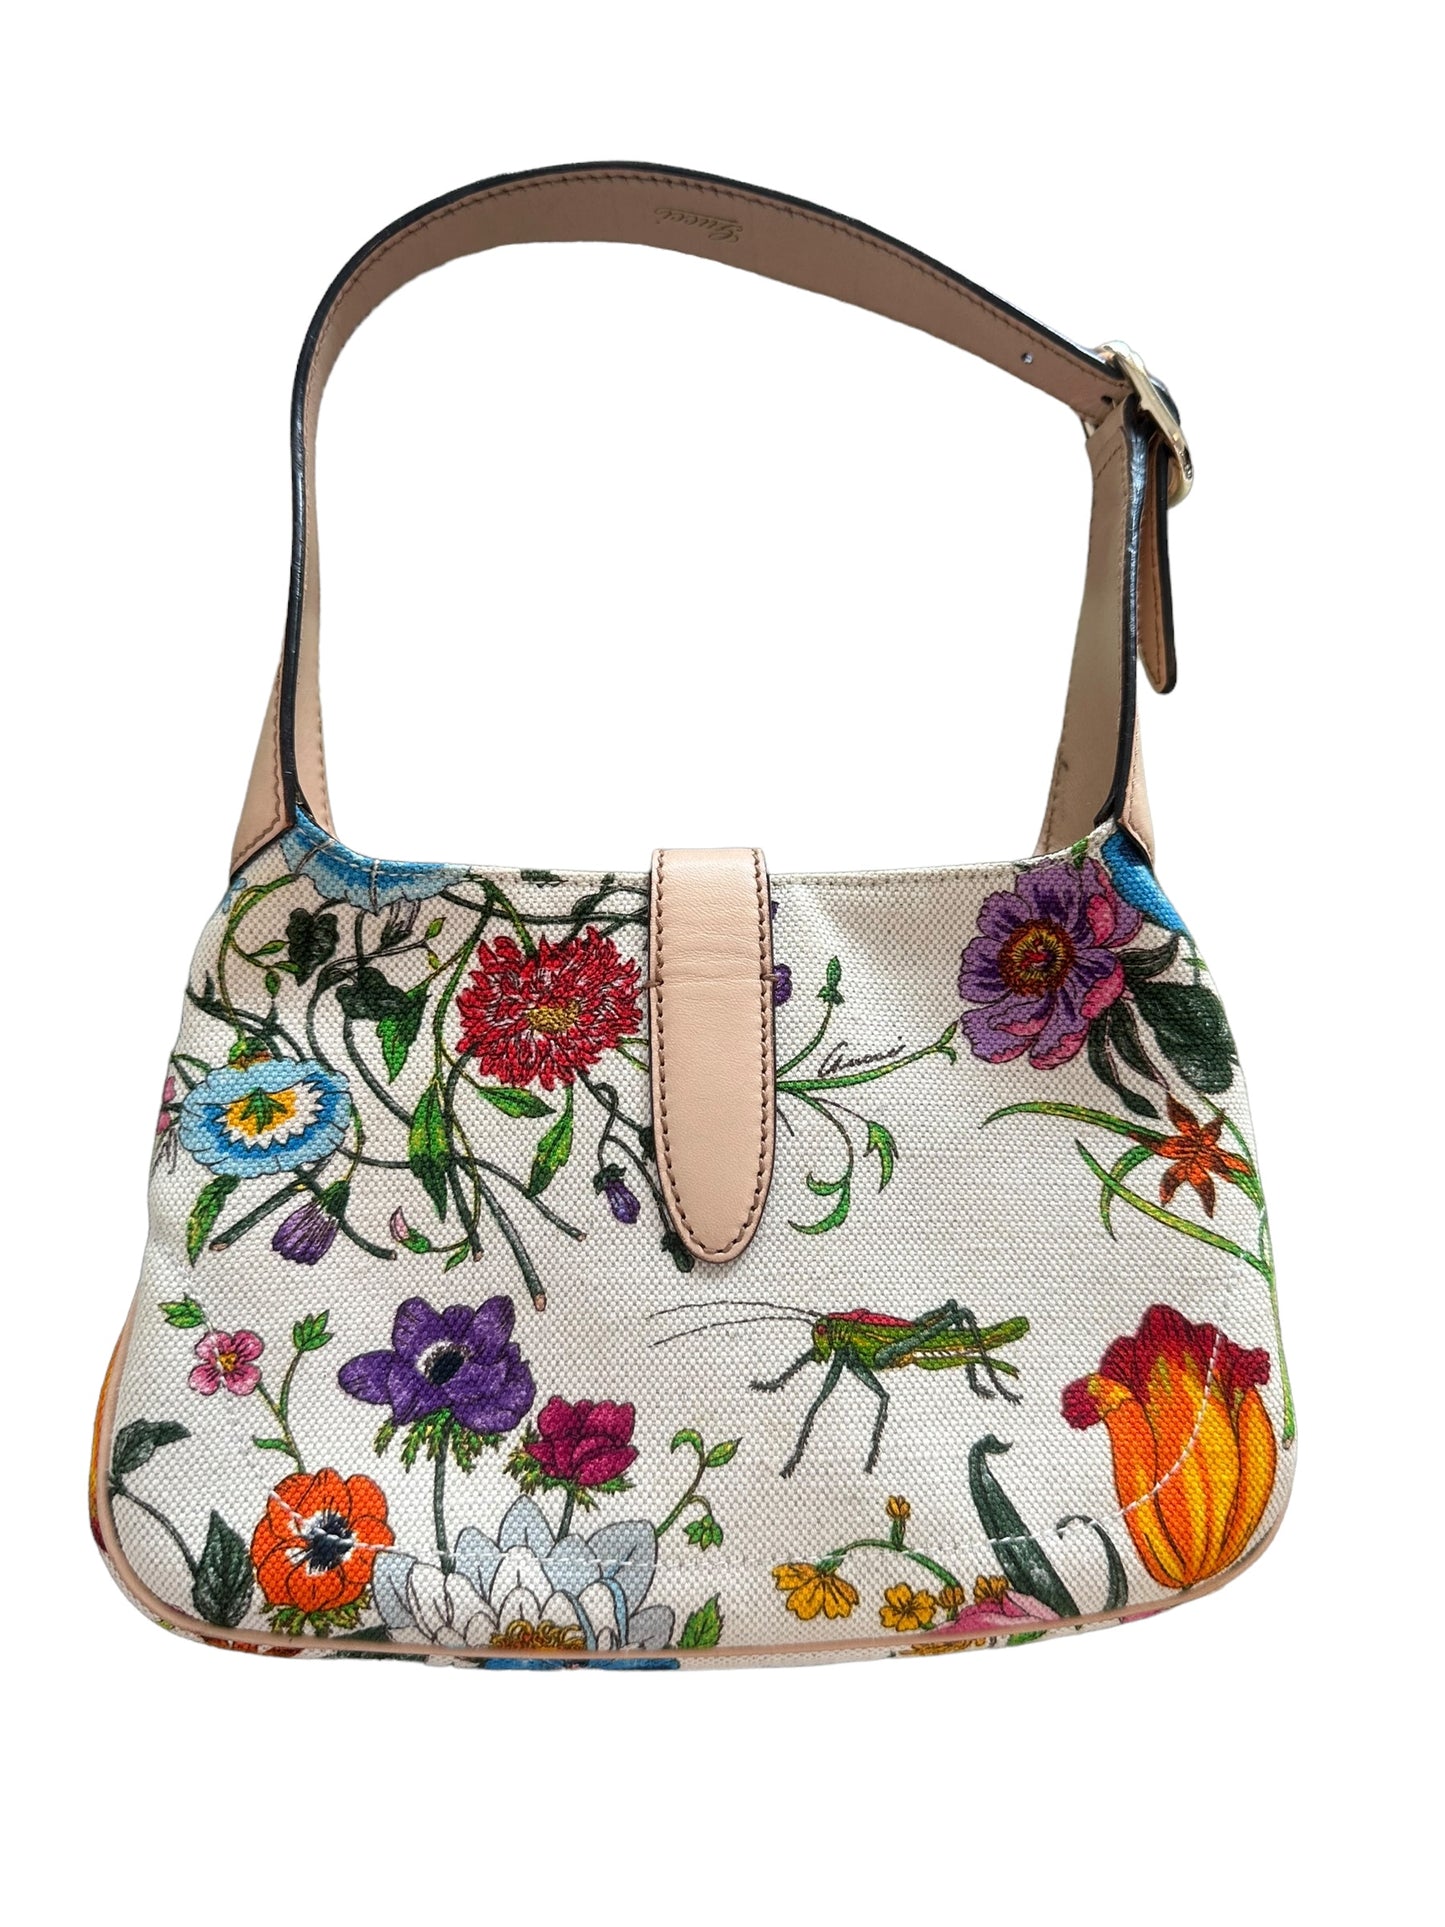 Gucci Limited Edition Floral Mini Jackie